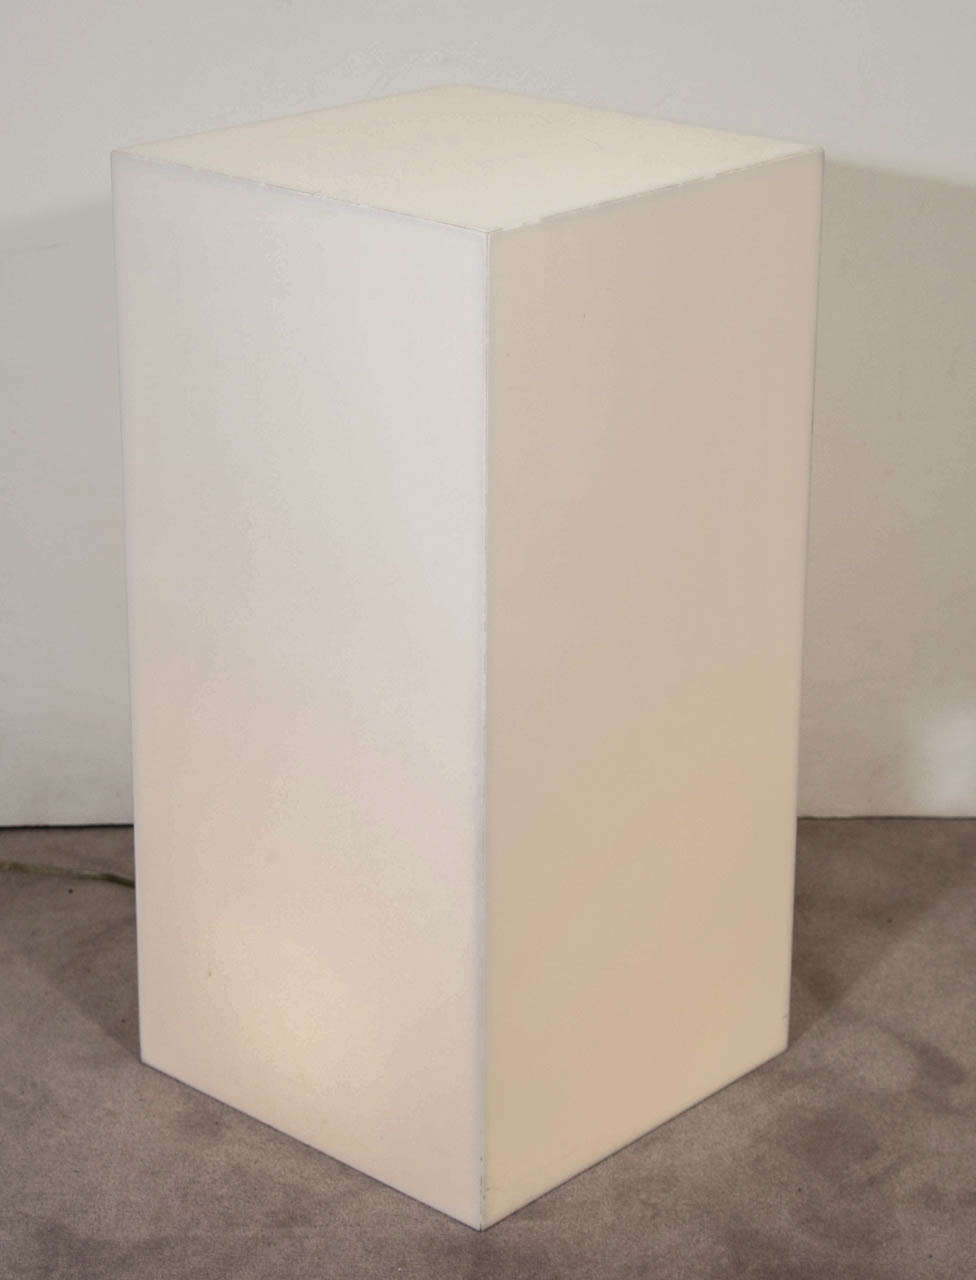 A 20th century white acrylic rectangular column illuminating pedestal. Good condition with some wear to the edges and some scratches.